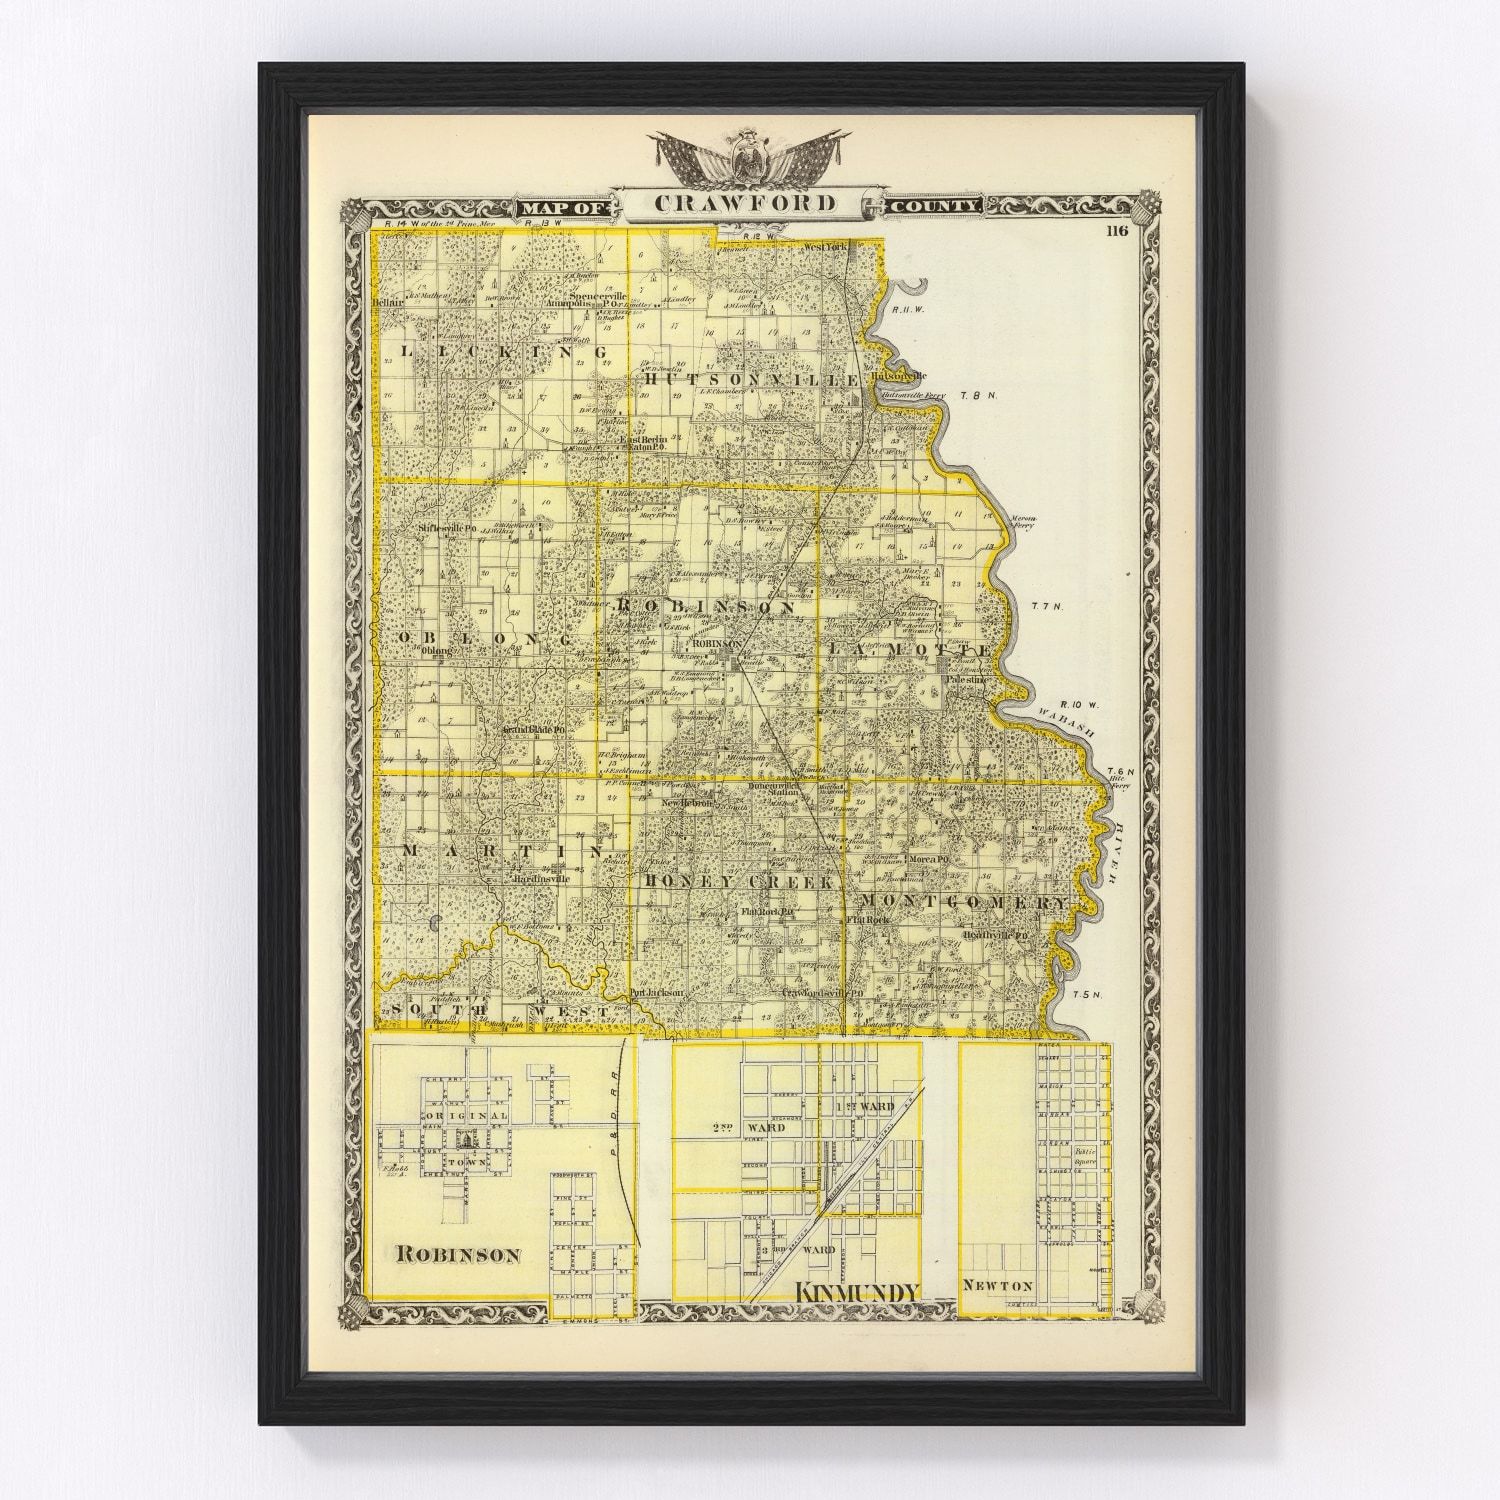 Vintage Map Of Crawford County Illinois 1876 By Teds Vintage Art 1626